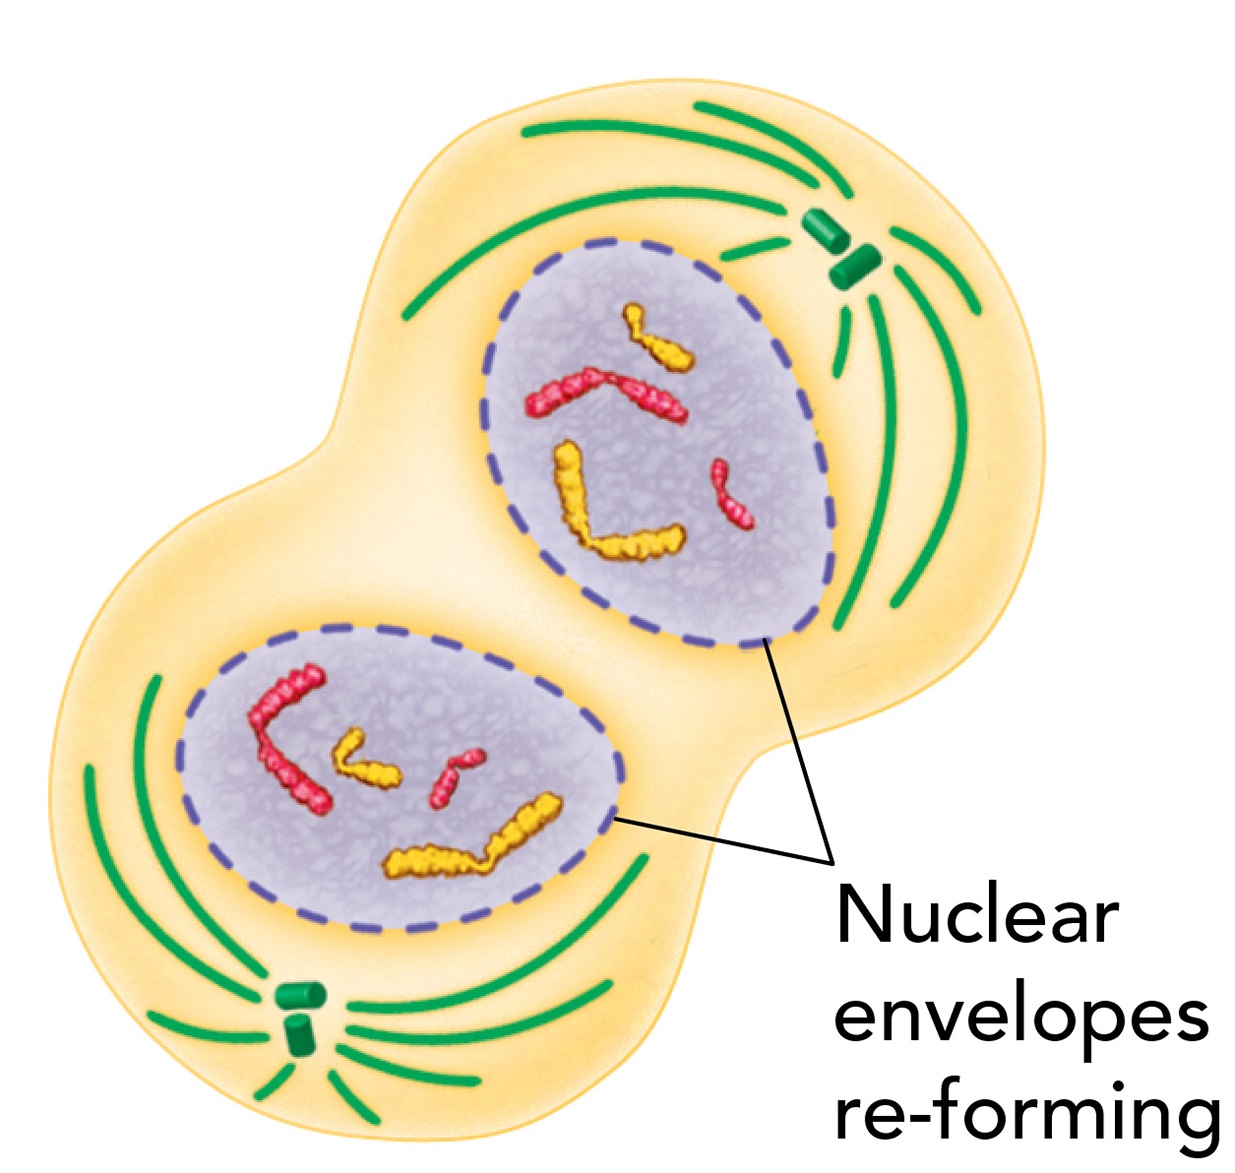 A nuclear envelope re-forms around each cluster of chromosomes in the divided cell.